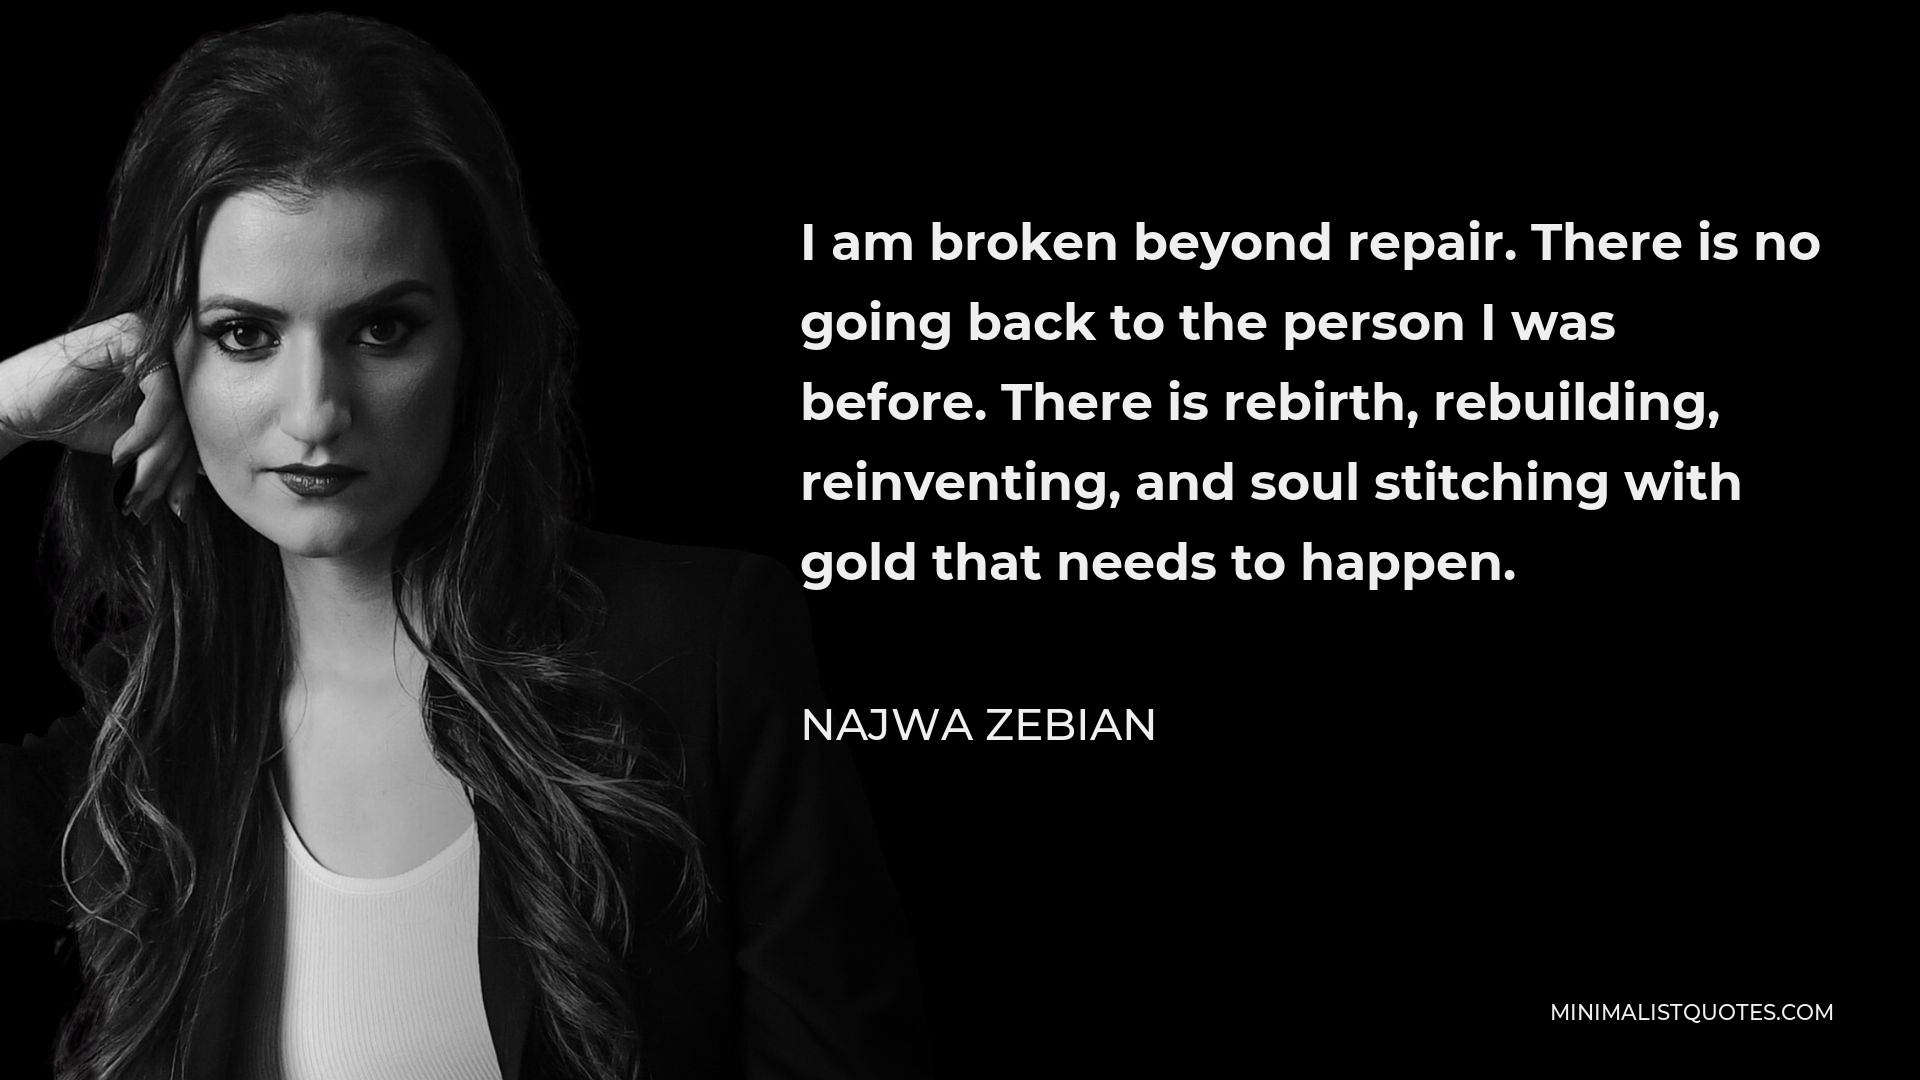 Najwa Zebian Quote - I am broken beyond repair. There is no going back to the person I was before. There is rebirth, rebuilding, reinventing, and soul stitching with gold that needs to happen.